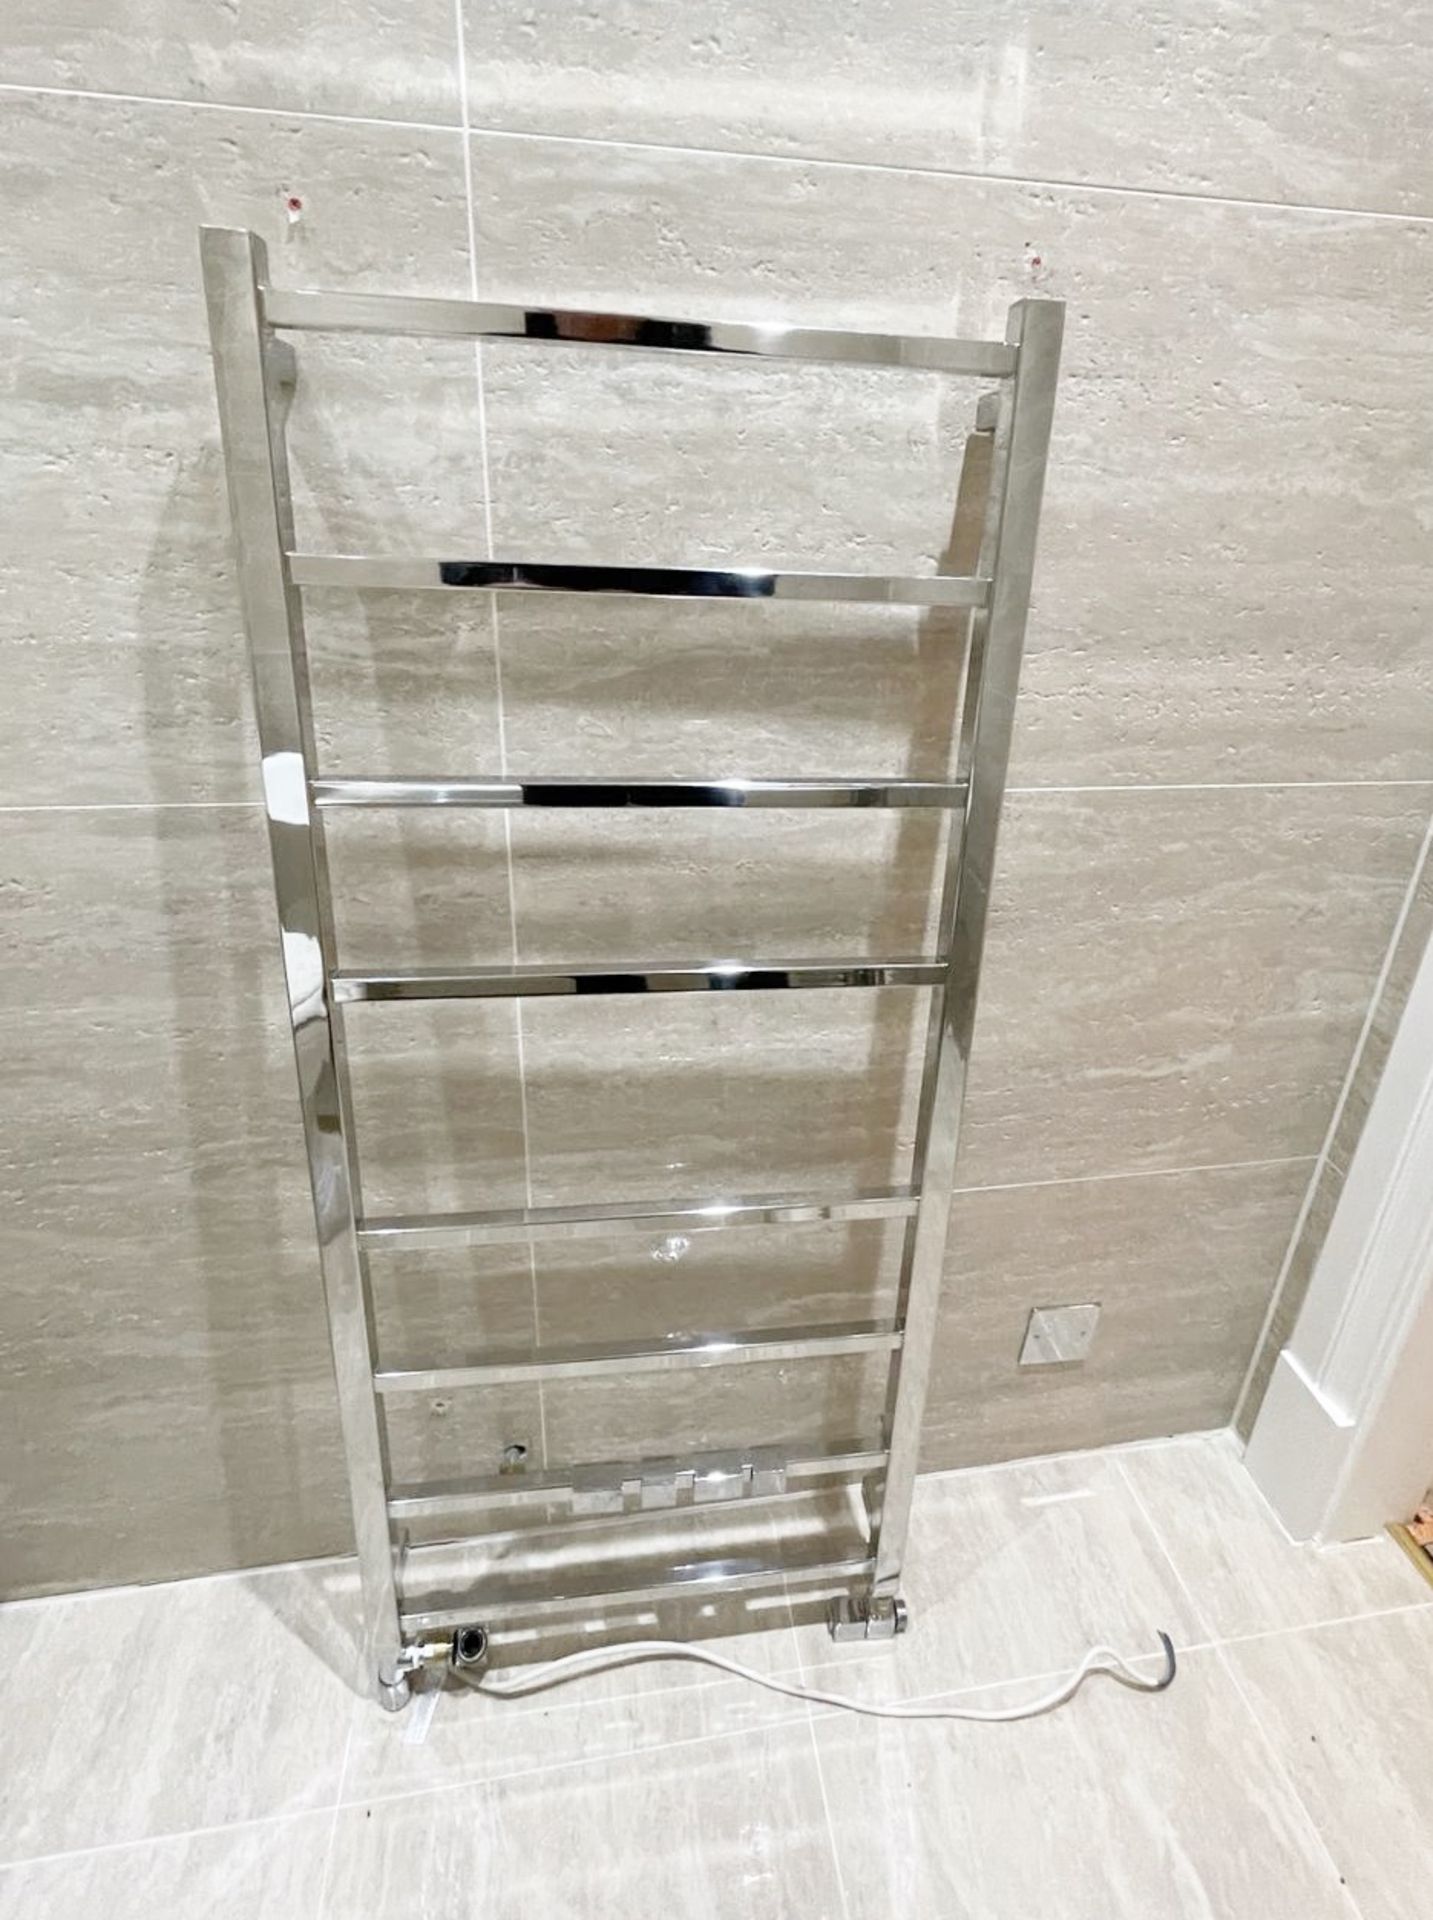 1 x Premium Towel Radiator in Chrome - Ref: FRNT/BD - CL896 - NO VAT ON THE HAMMER - Location: - Image 2 of 3